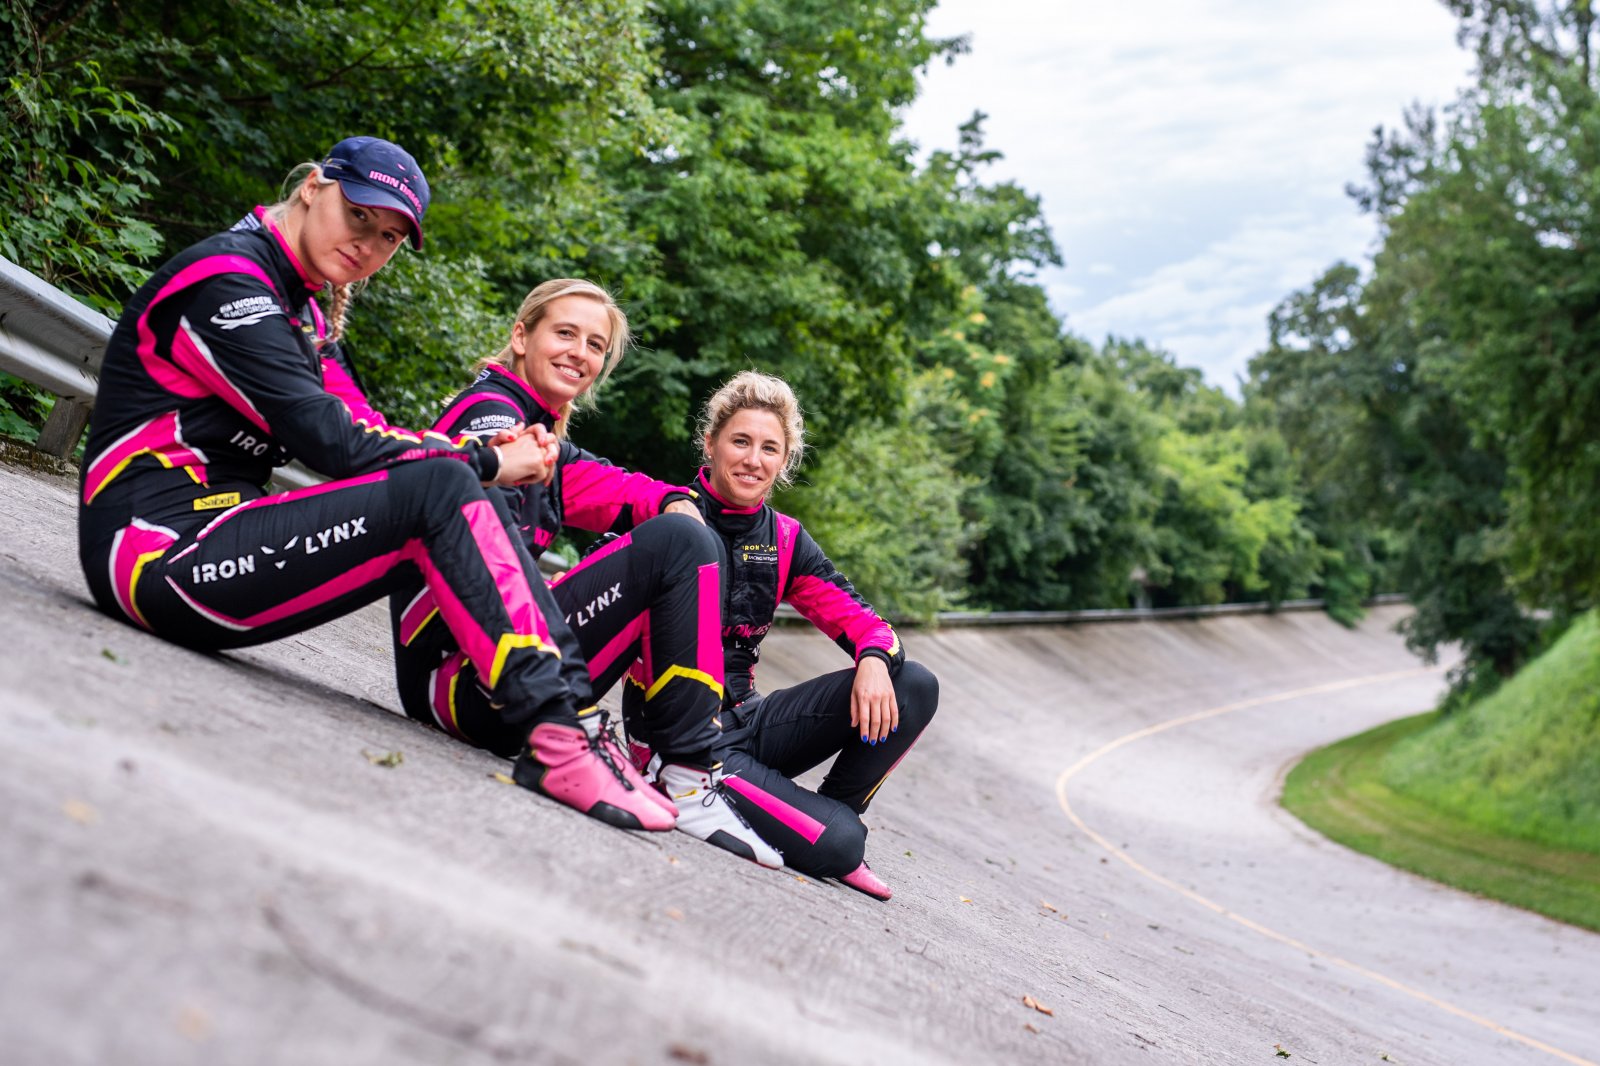 Iron Lynx confirms title defence with two Pro cars, Iron Dames expands to full Endurance Cup assault